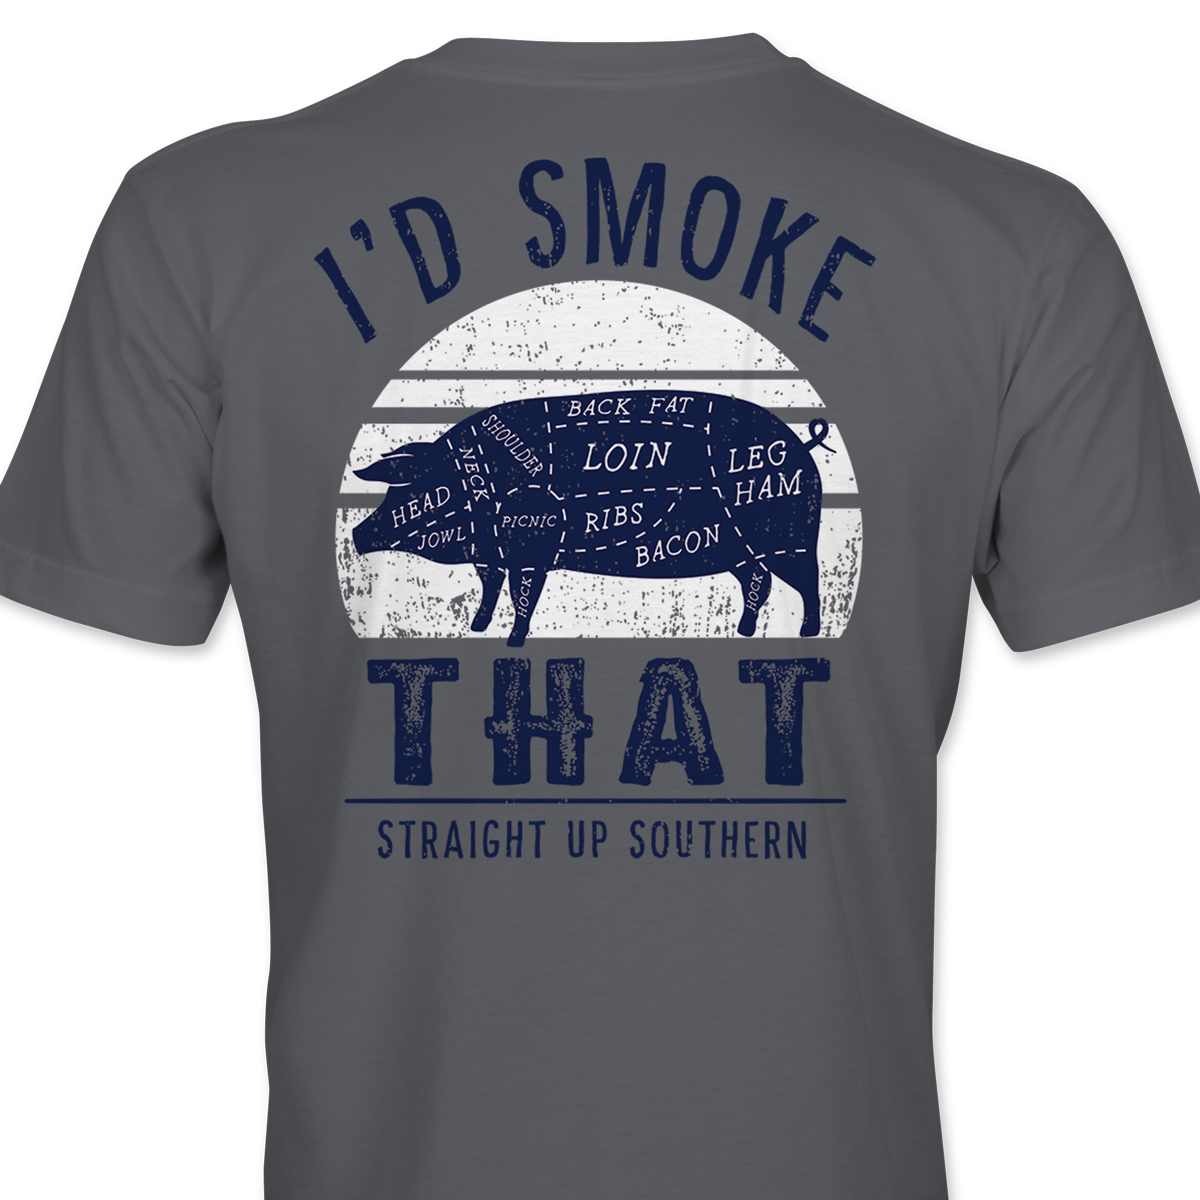 When In Doubt, Smoke It Out. T-Shirts